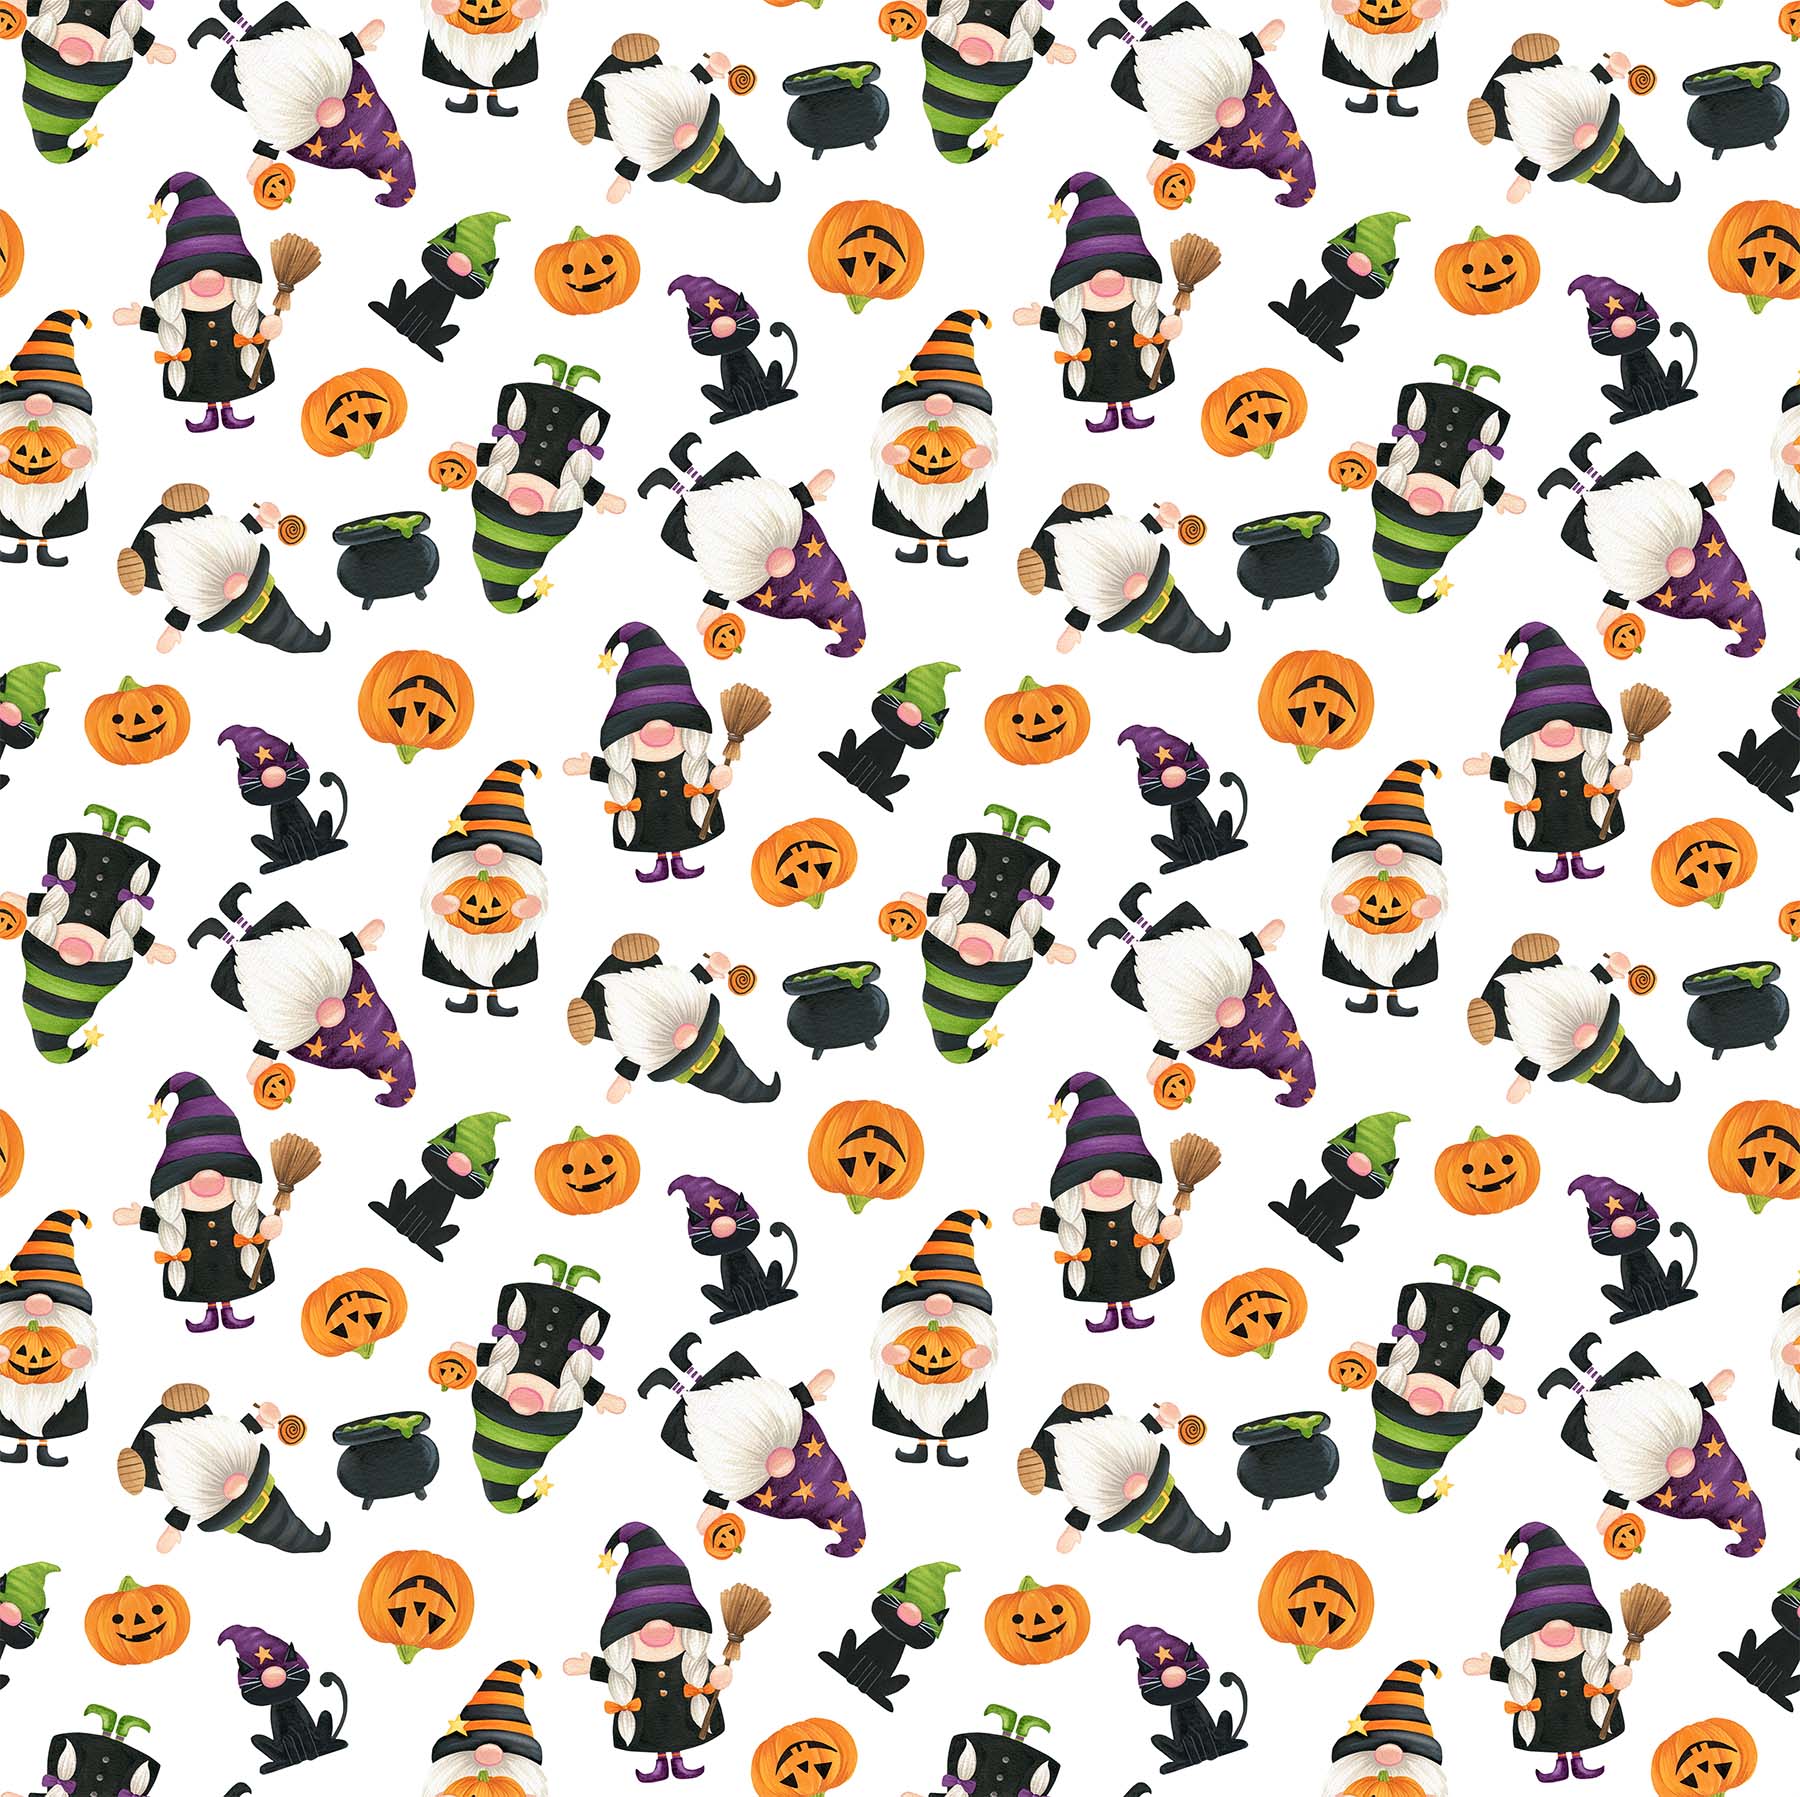 Gnomes Night Out 100% Cotton Fabric - 24662-10